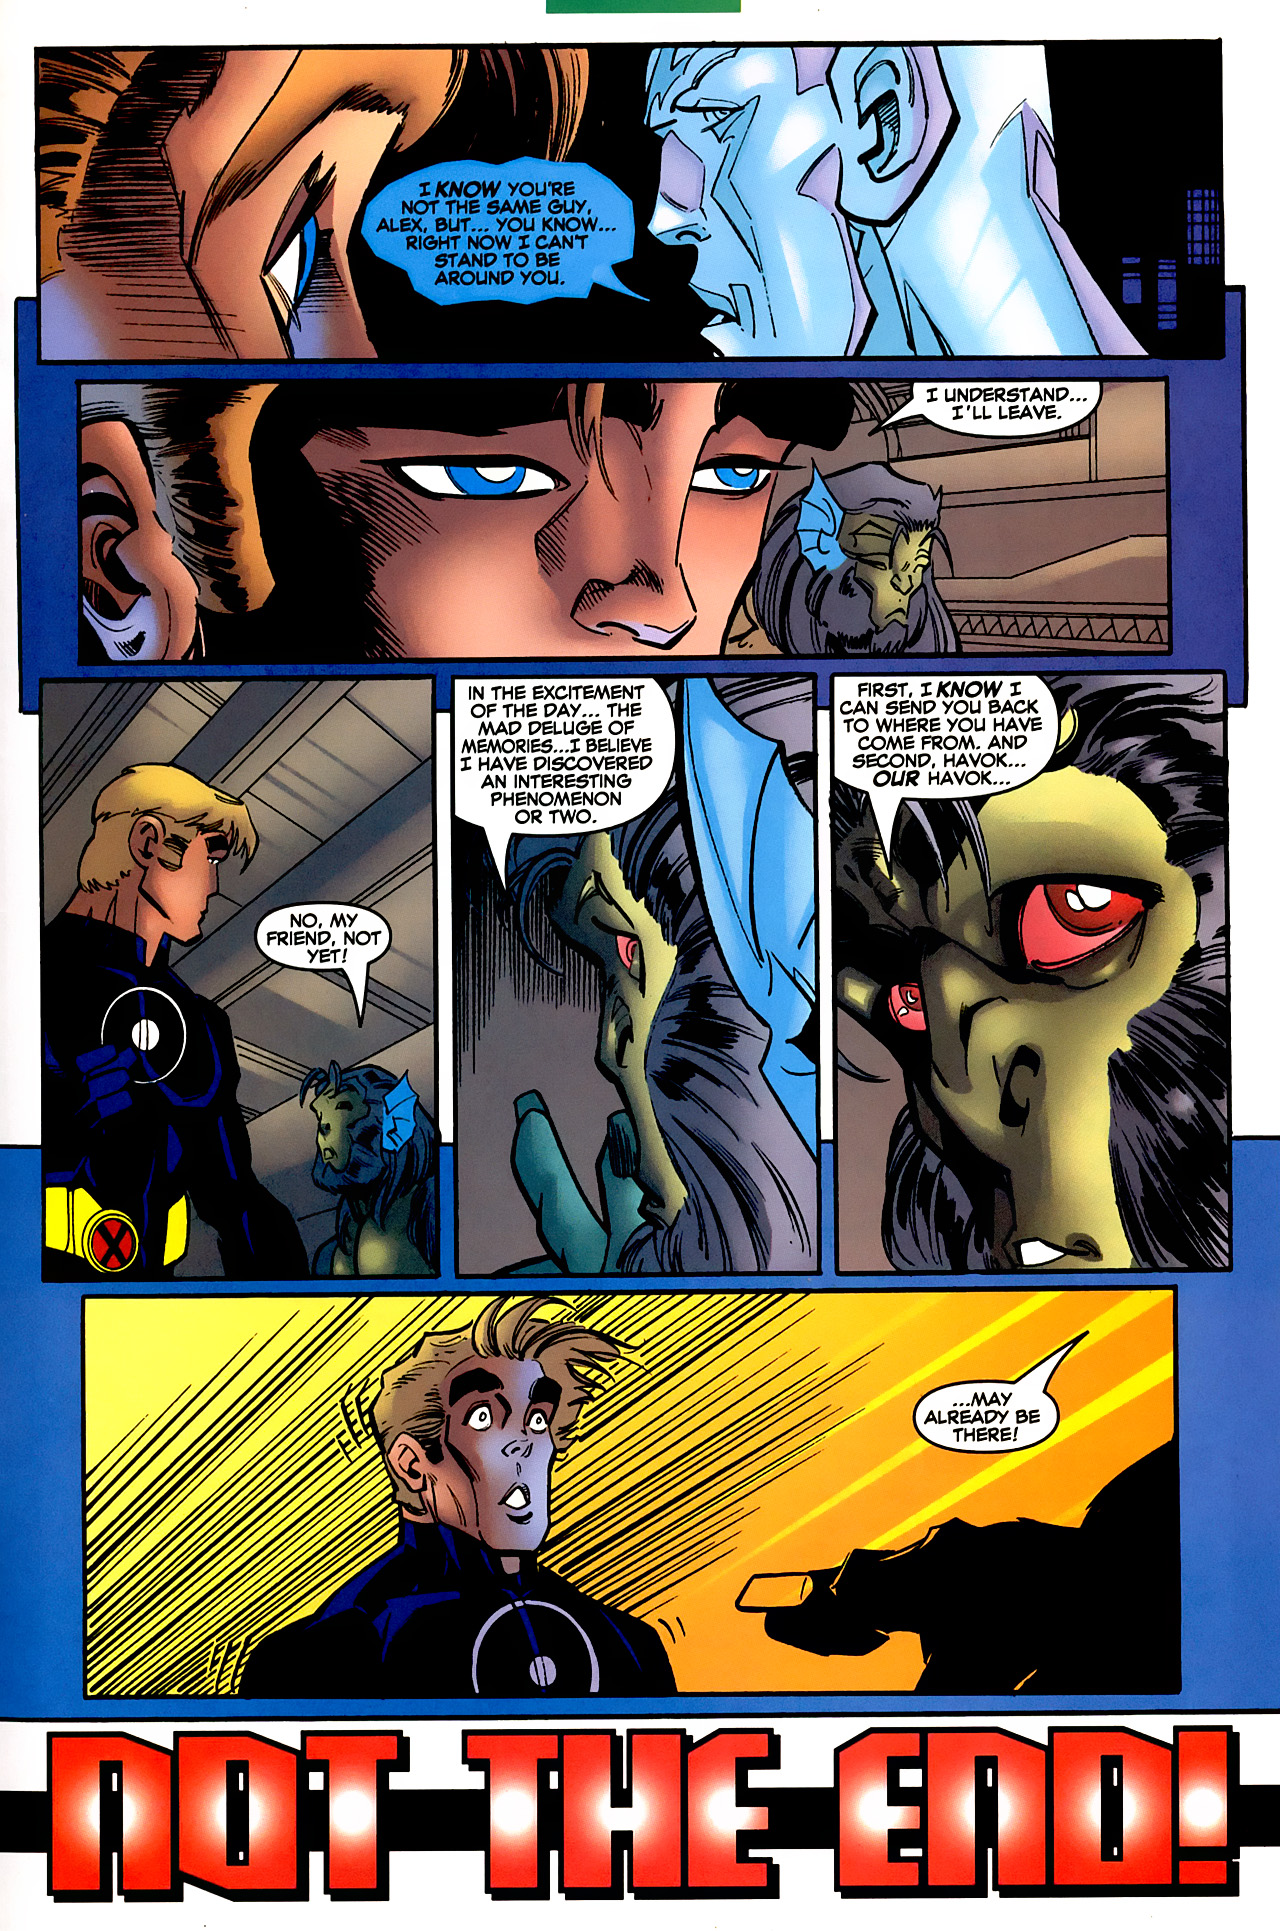 Read online Mutant X comic -  Issue #24 - 23